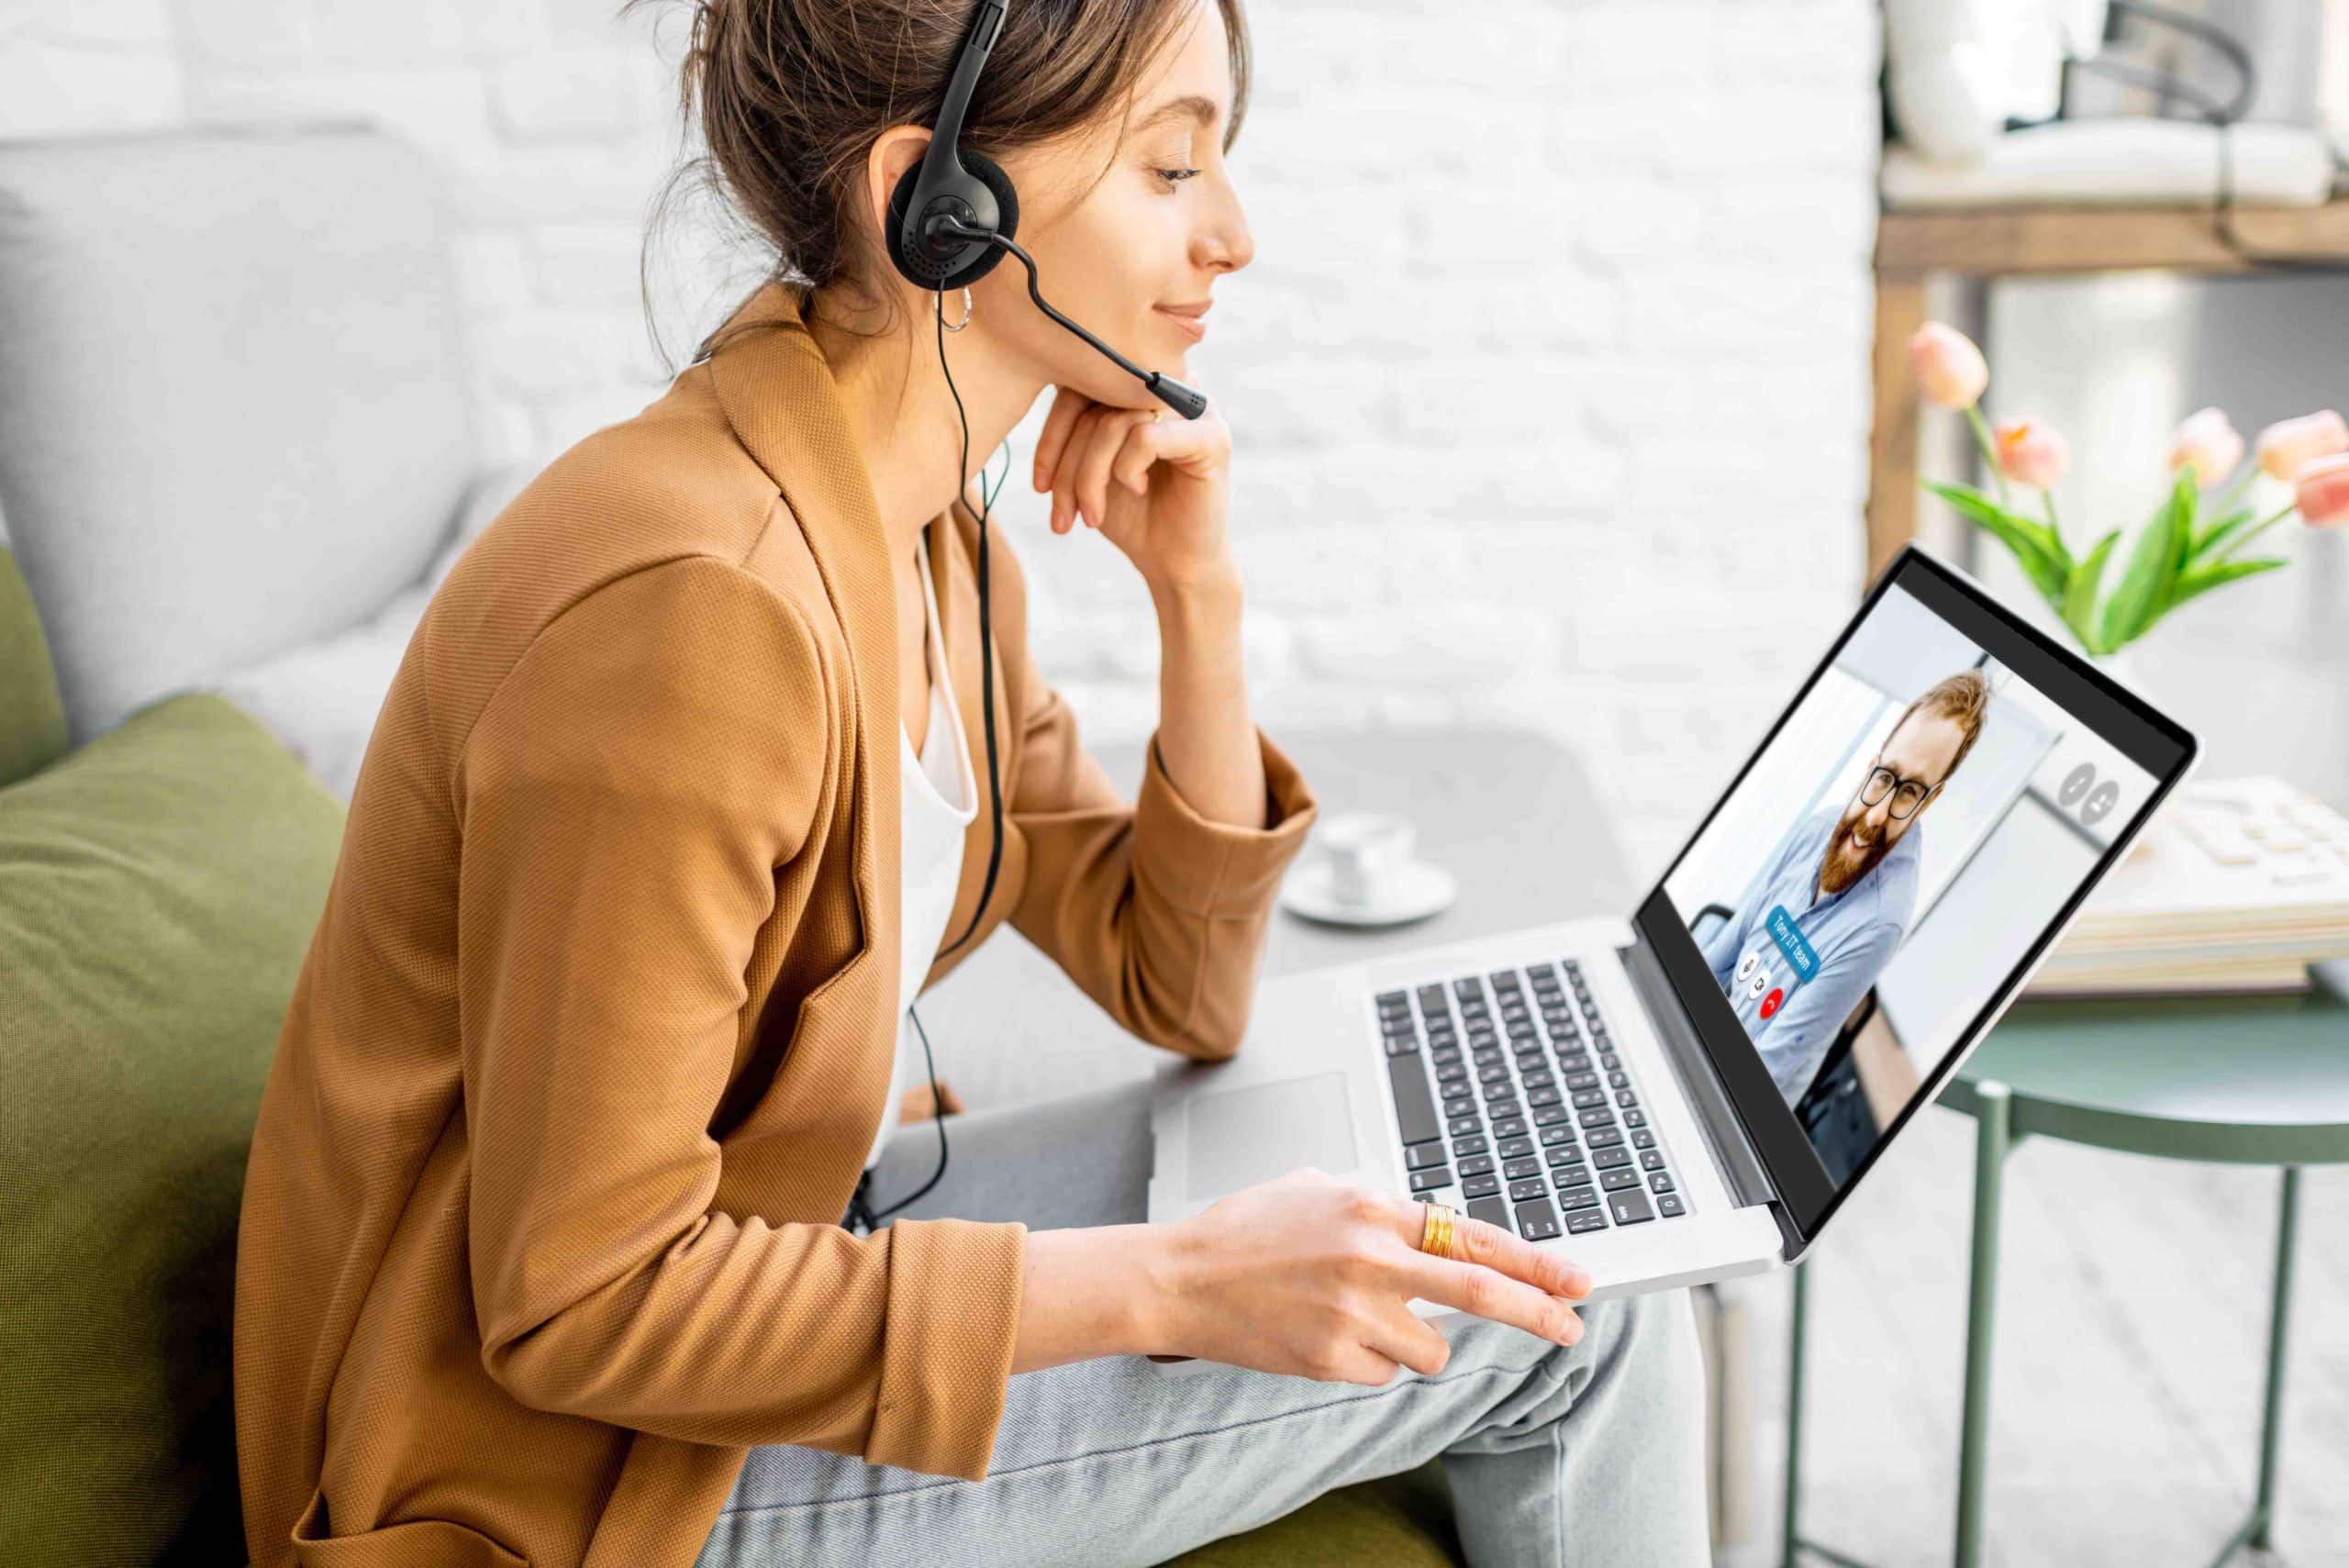 Women on video conference with laptop and headset